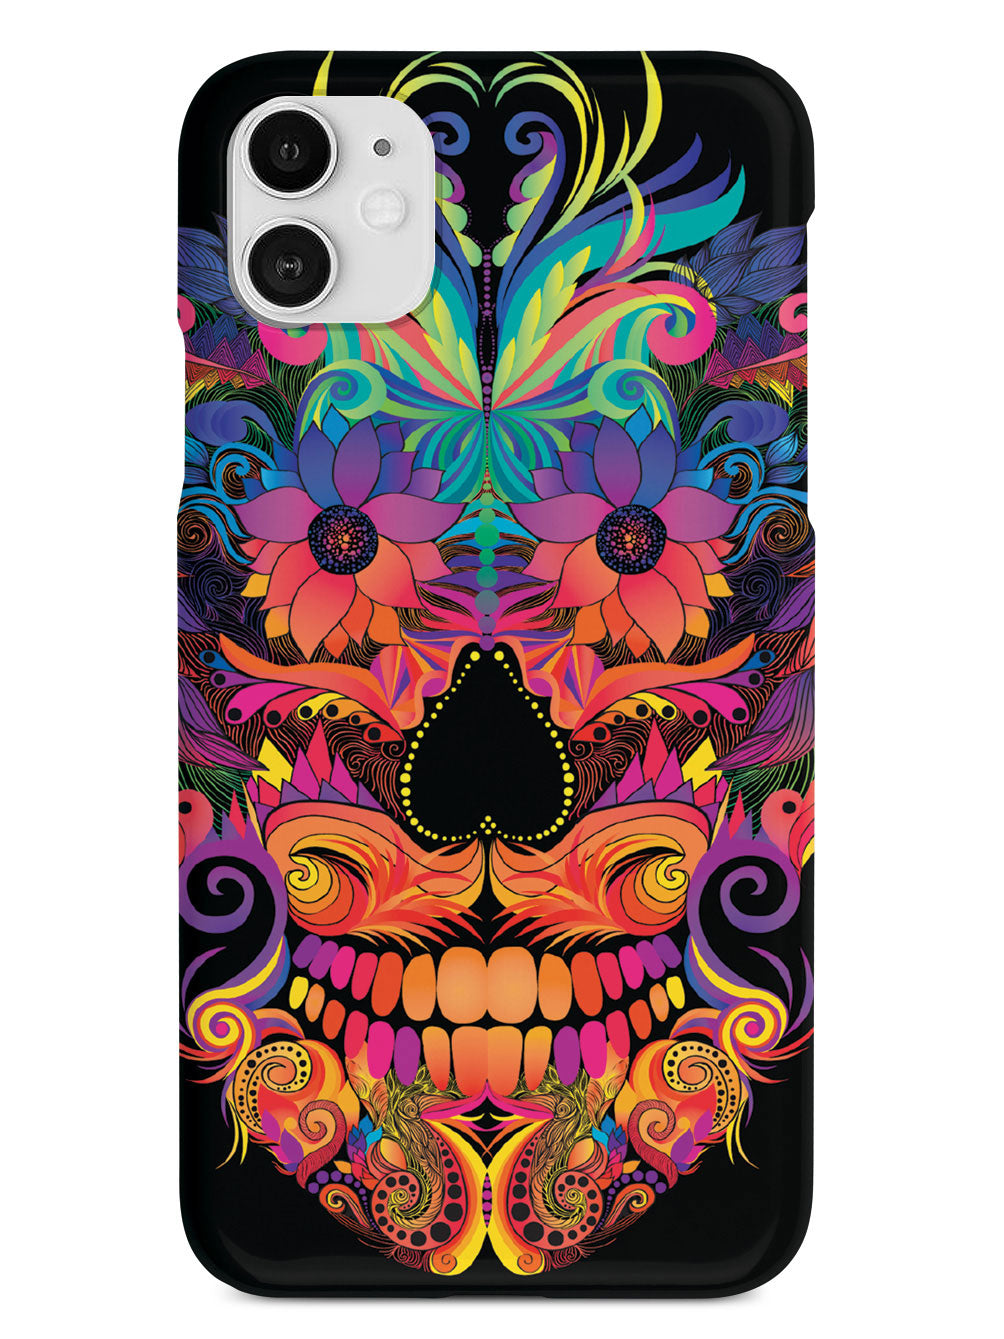 Mexican Skull Day of the Dead Inspired Case